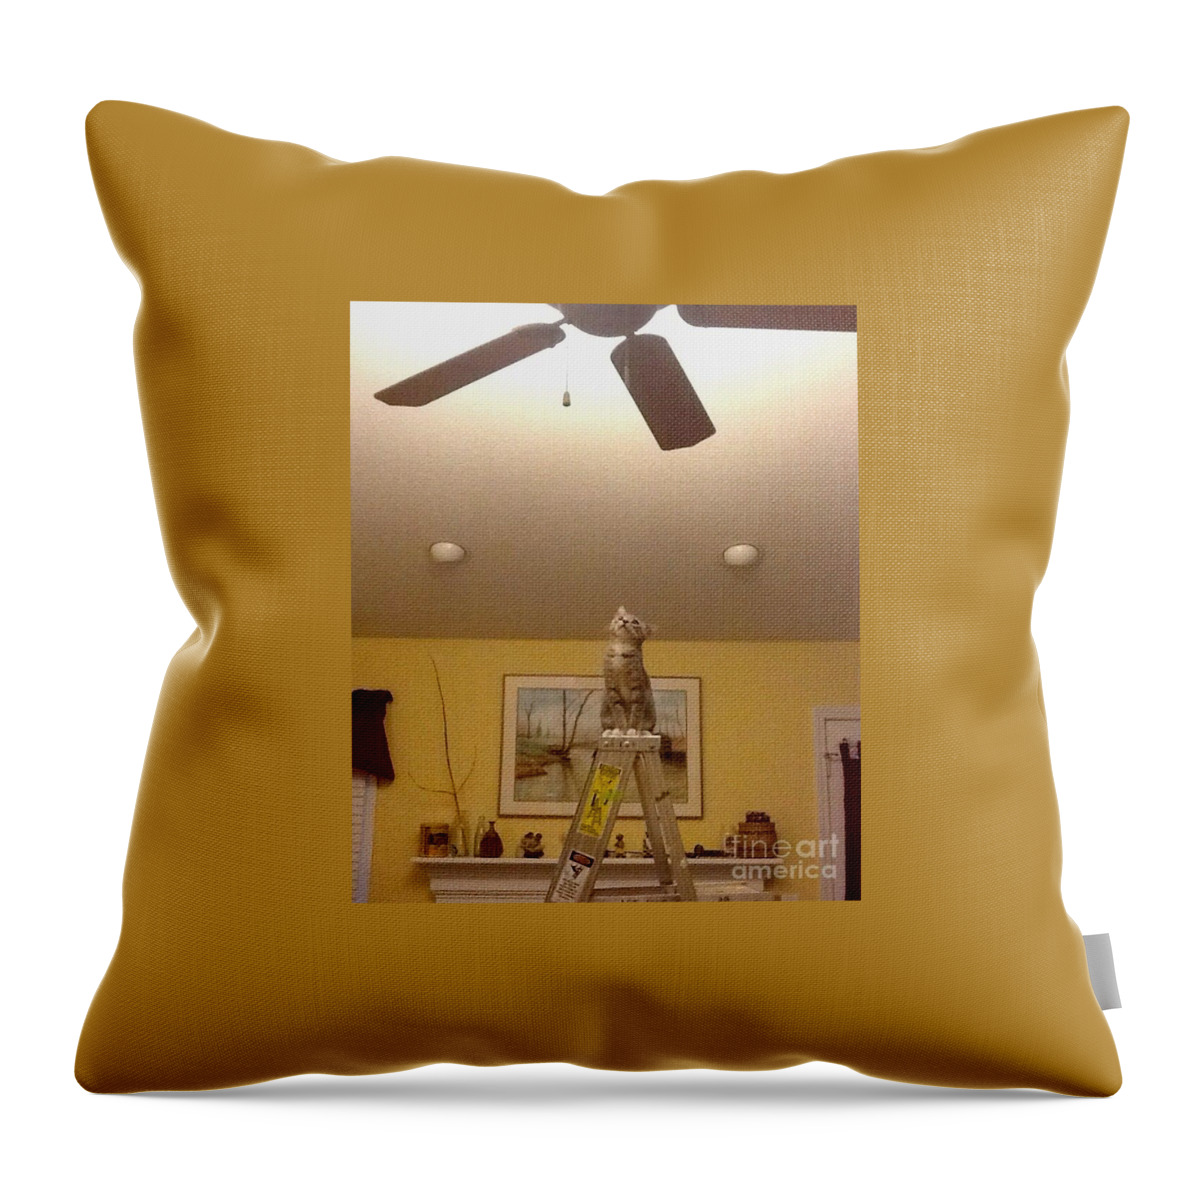 Cat Throw Pillow featuring the photograph Ladder Cat by Stacy C Bottoms